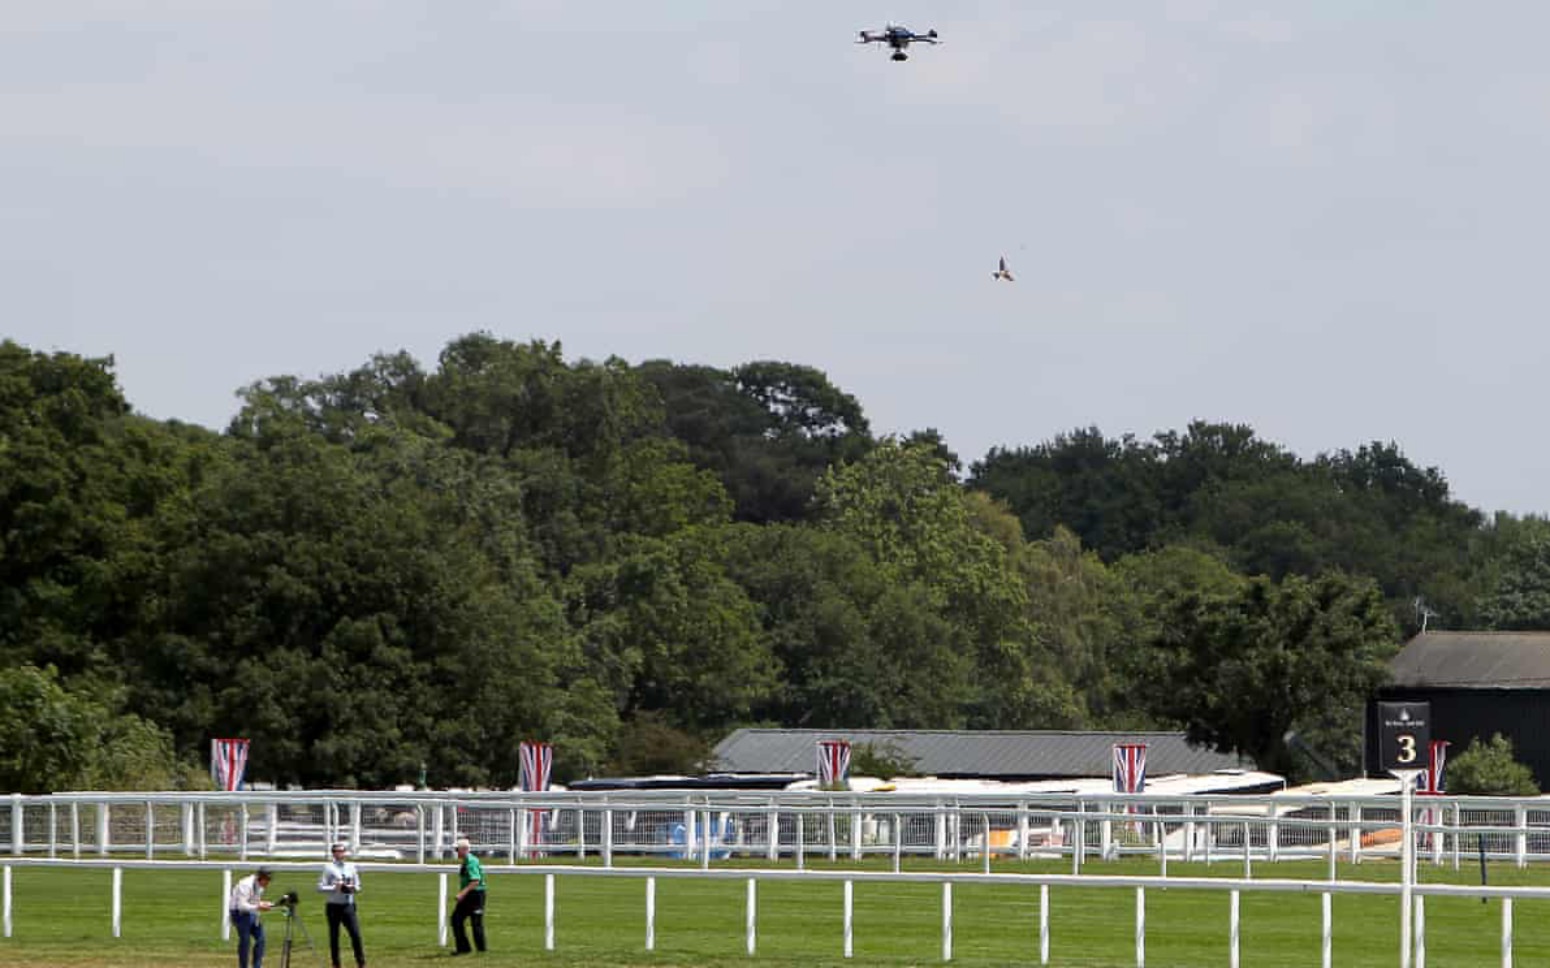 British racecourses want to ban drones during horse races